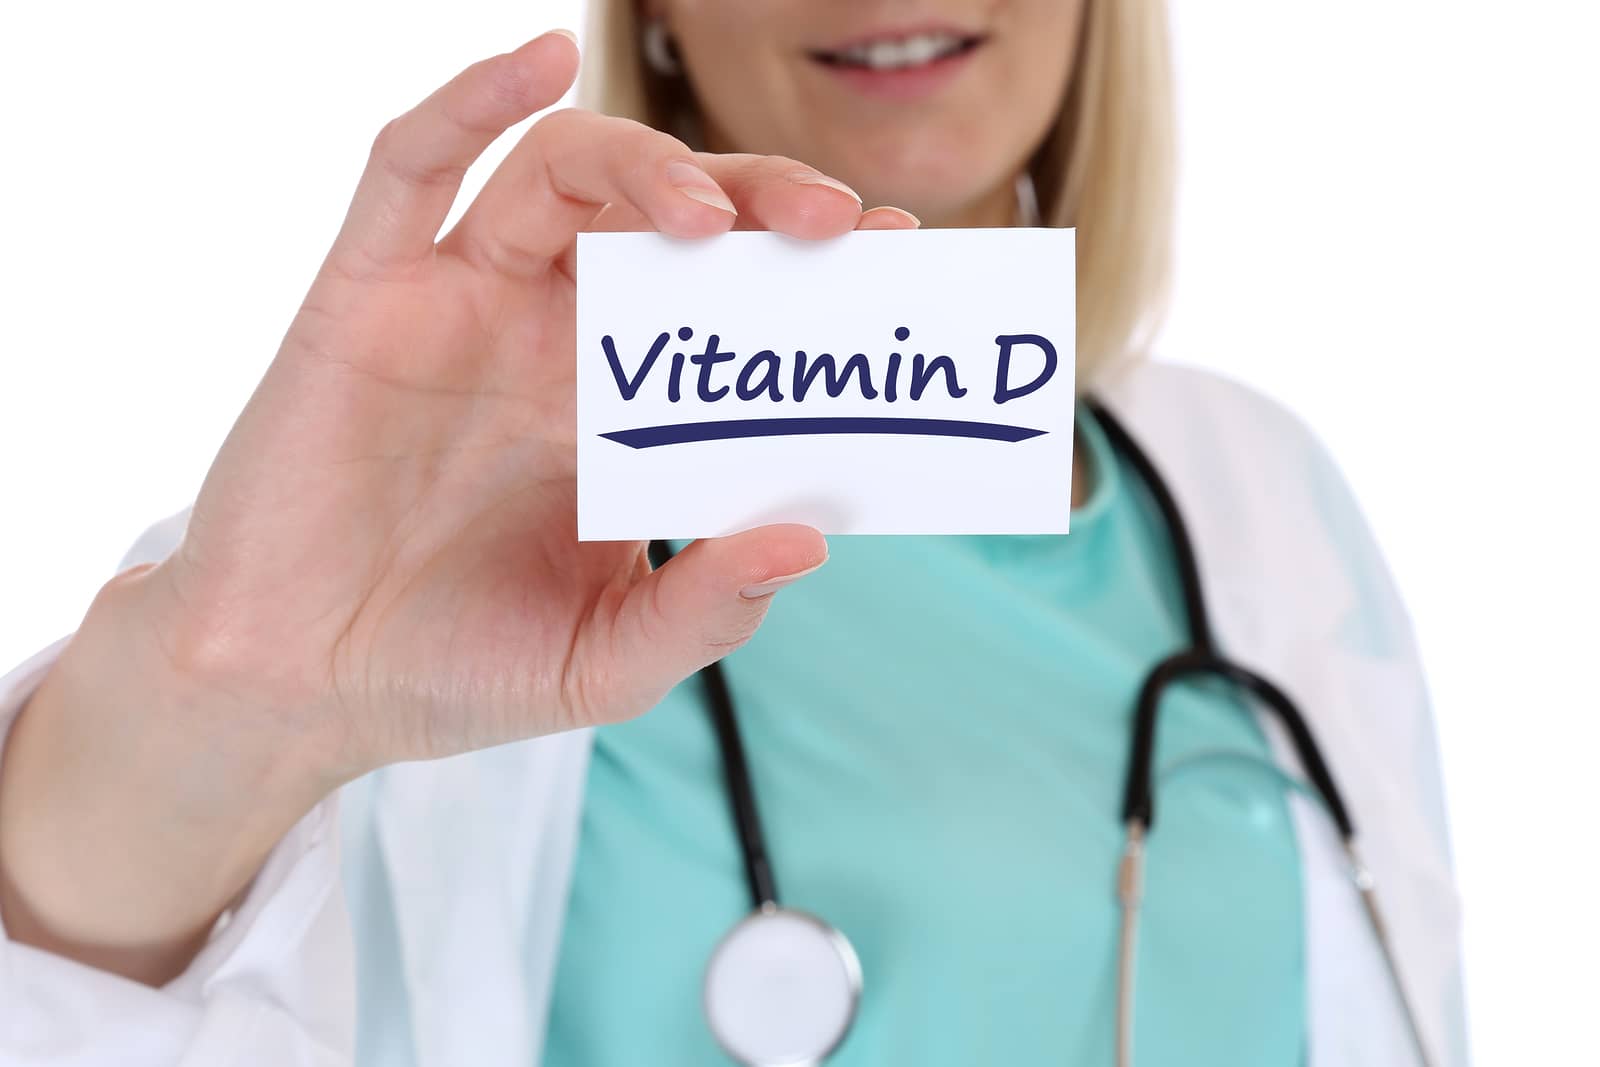 What are the reasons for the deficiency of Vitamin D in the body?